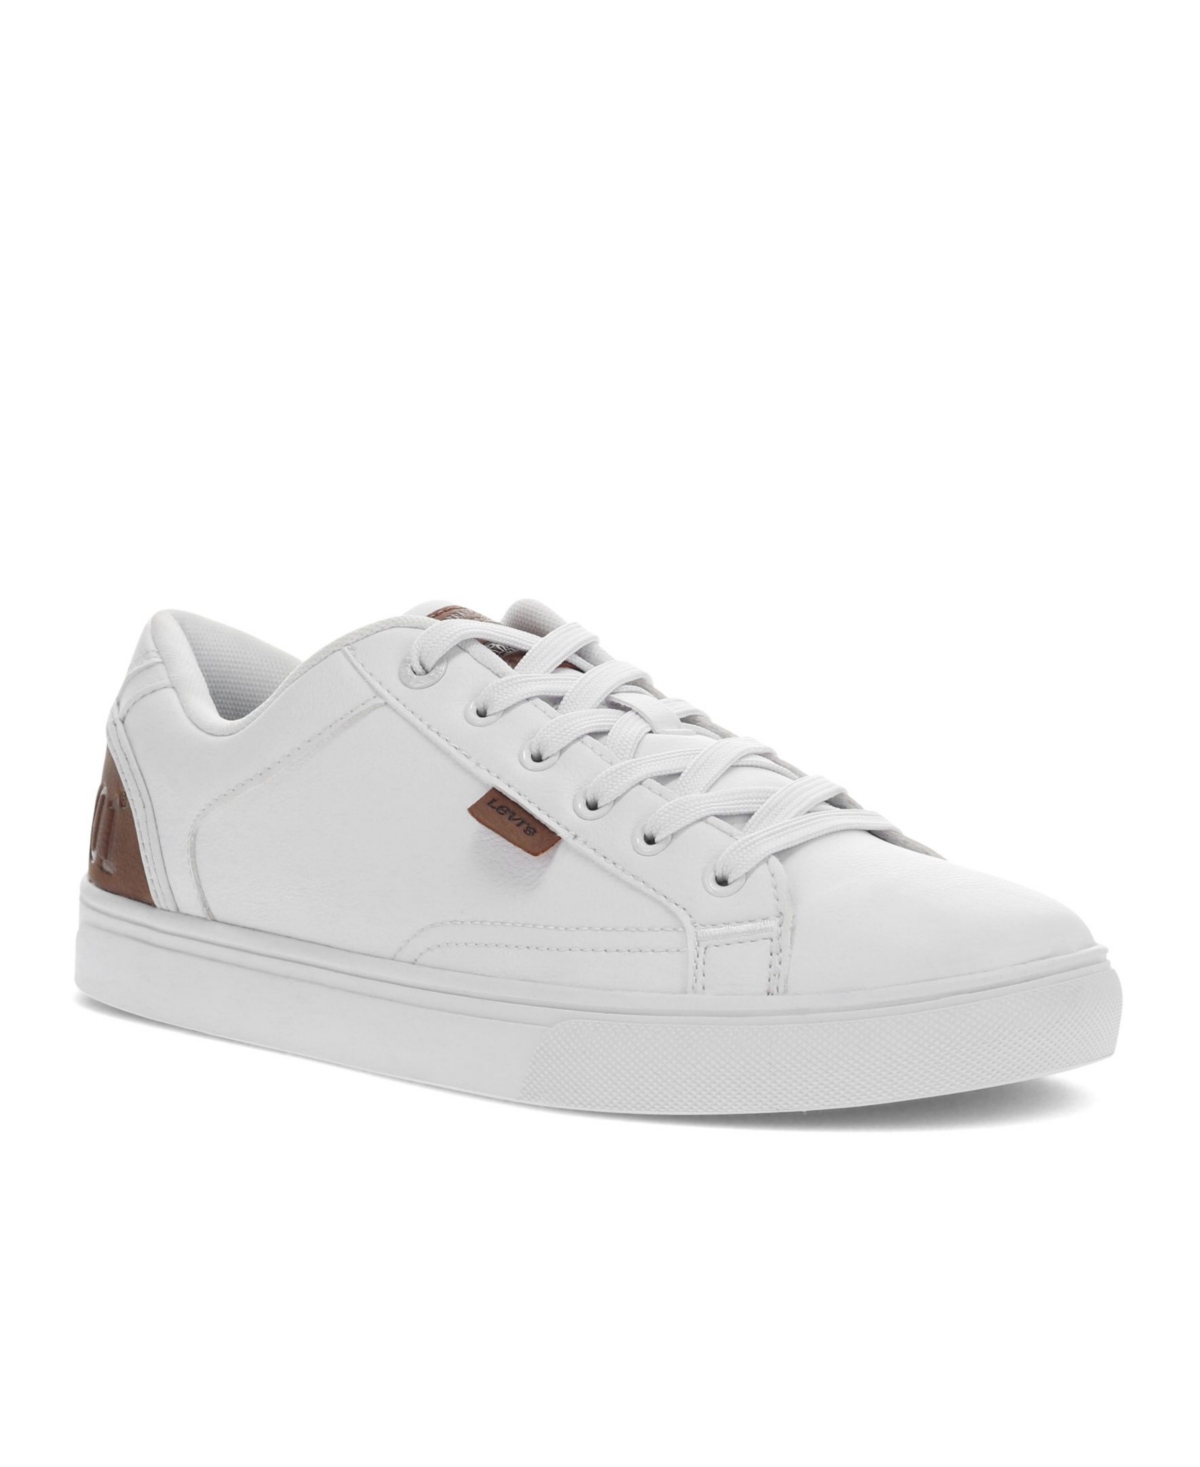 UPC 191605697969 product image for Levi's Men's Jeffrey 501 Tumbled Ul Casual Sneakers Men's Shoes | upcitemdb.com